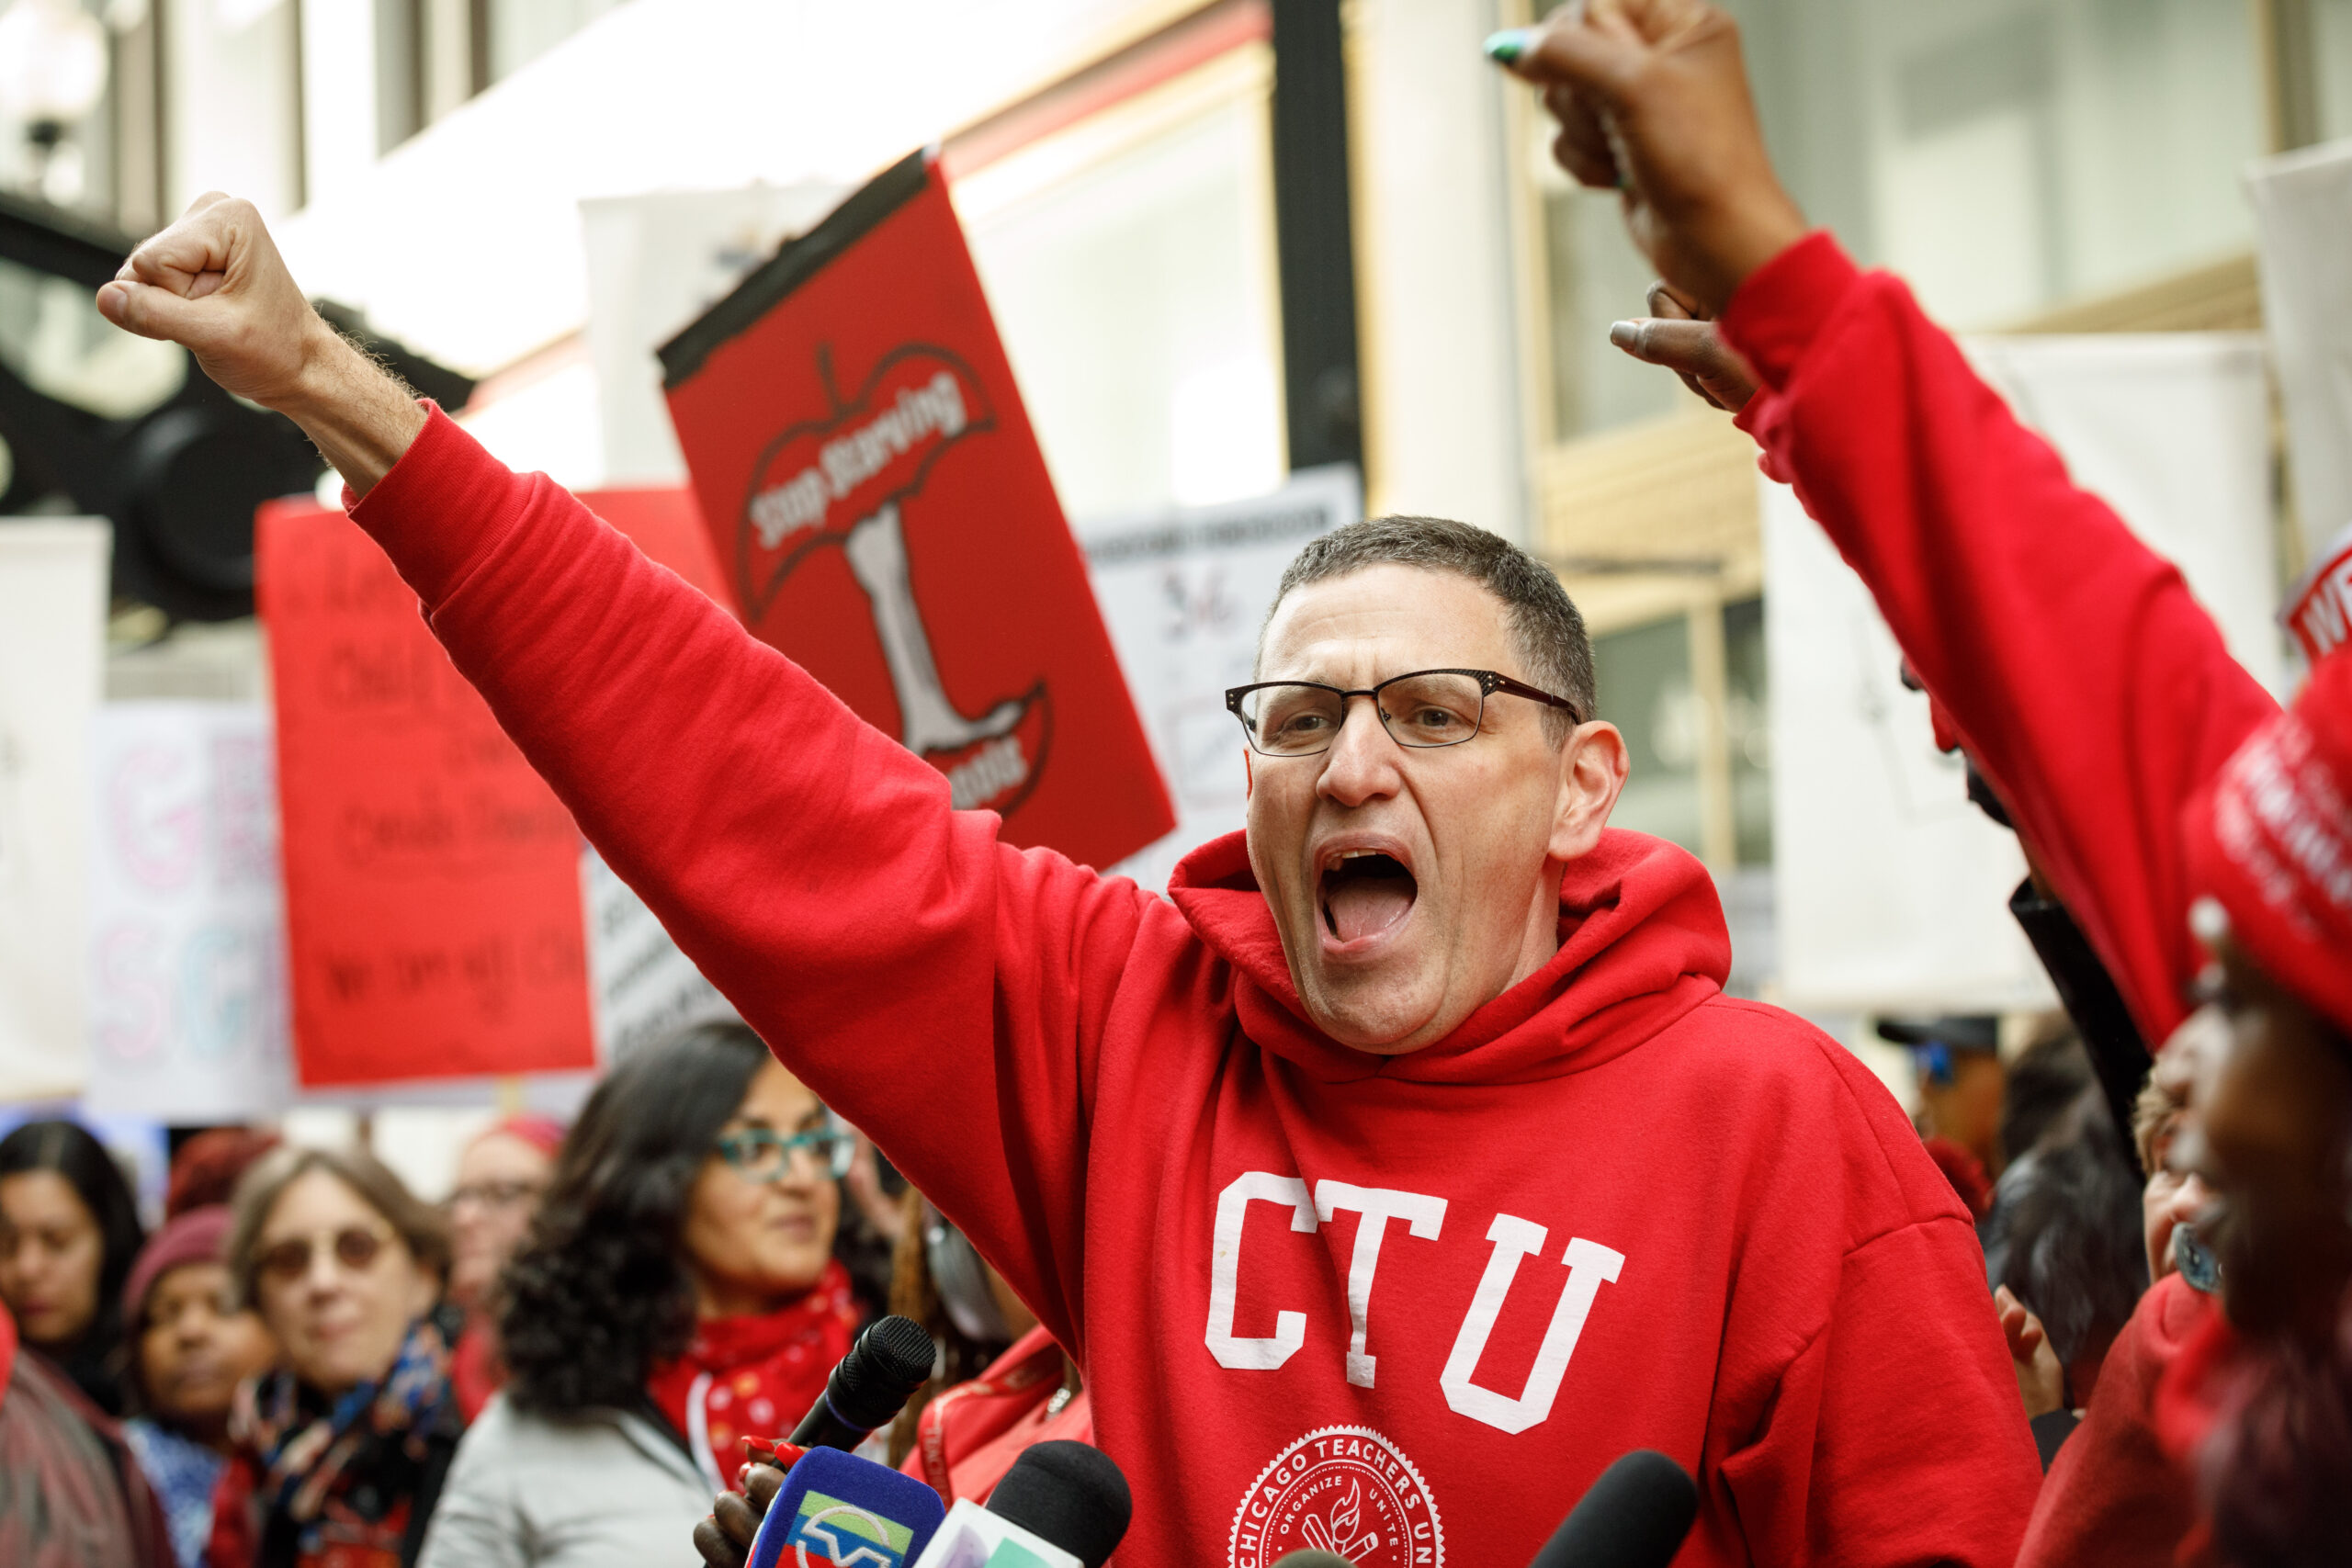 Chicago Teachers Union Pushes Progressive Ideology in Negotiations